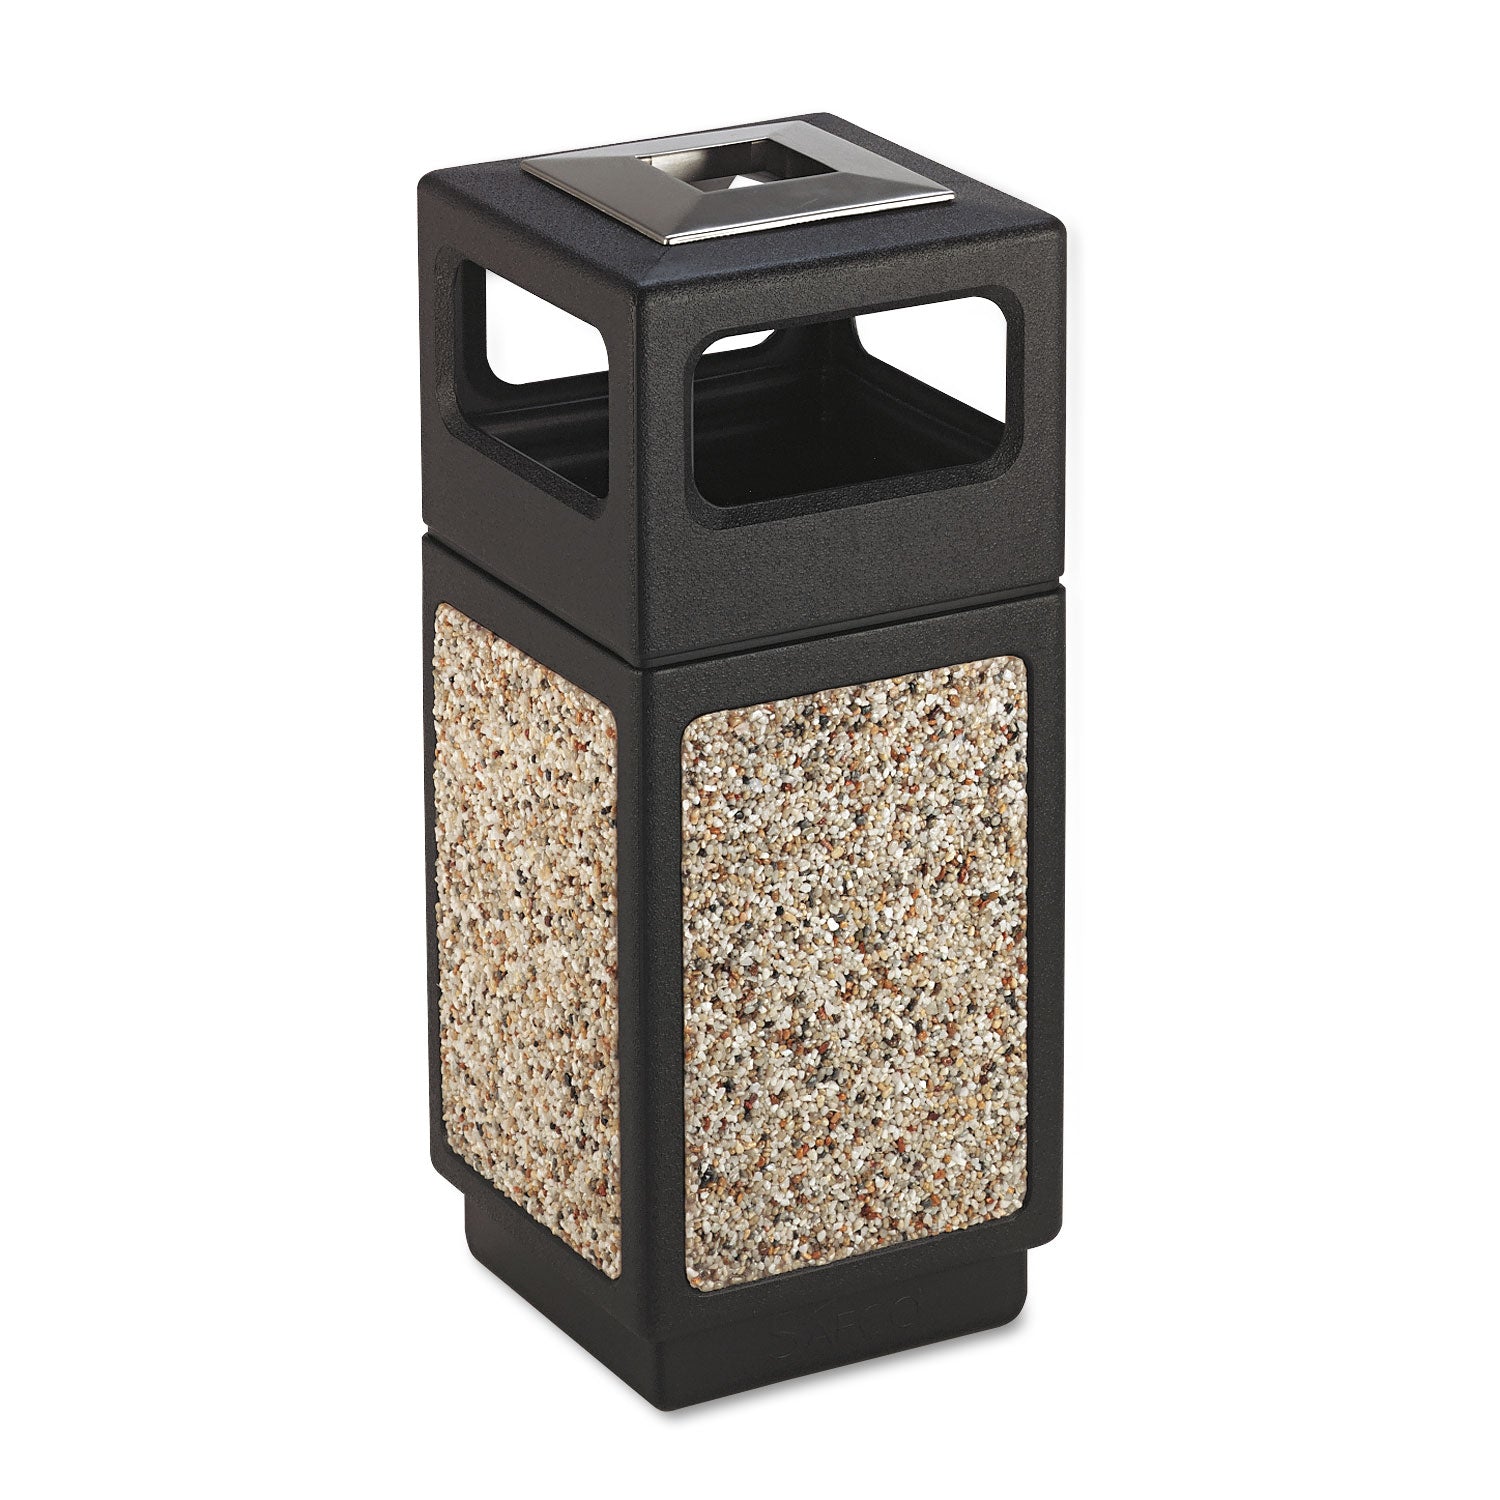 Canmeleon Aggregate Panel Receptacles, 15 gal, Polyethylene/Stainless Steel, Black - 